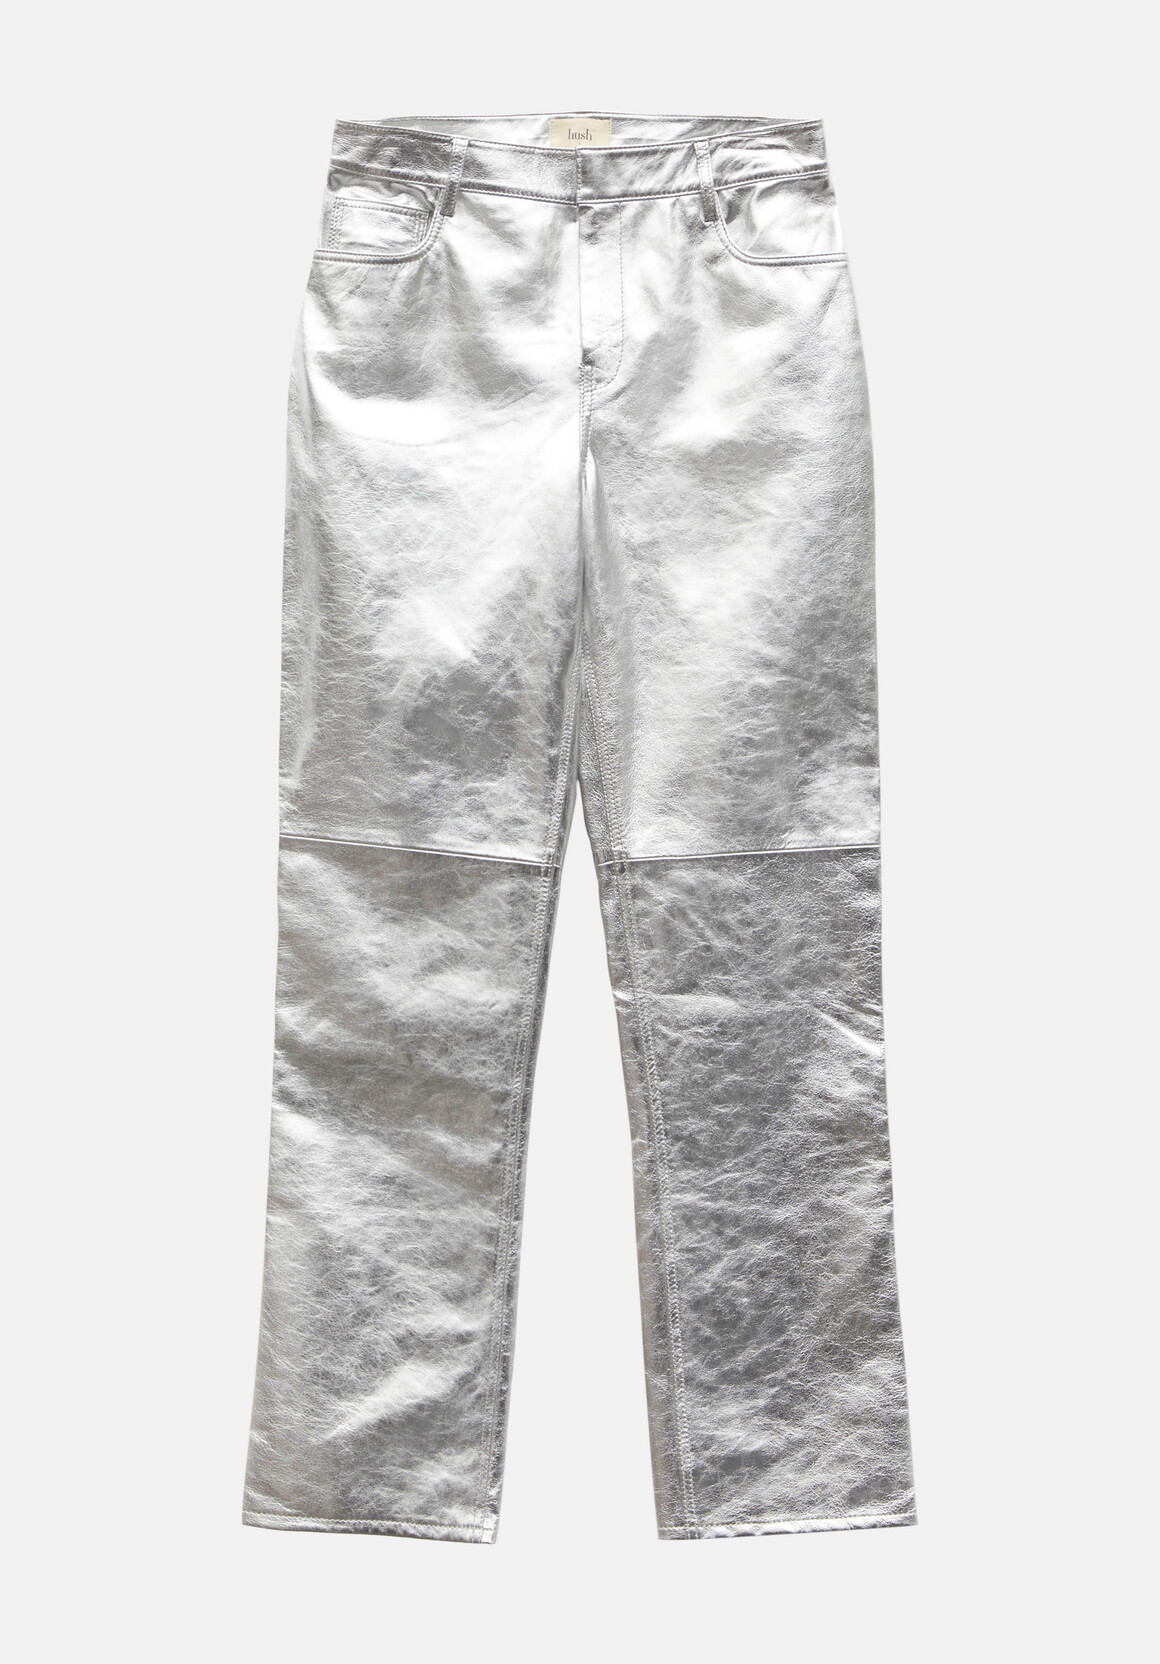 Hush + Silver Leather Trousers